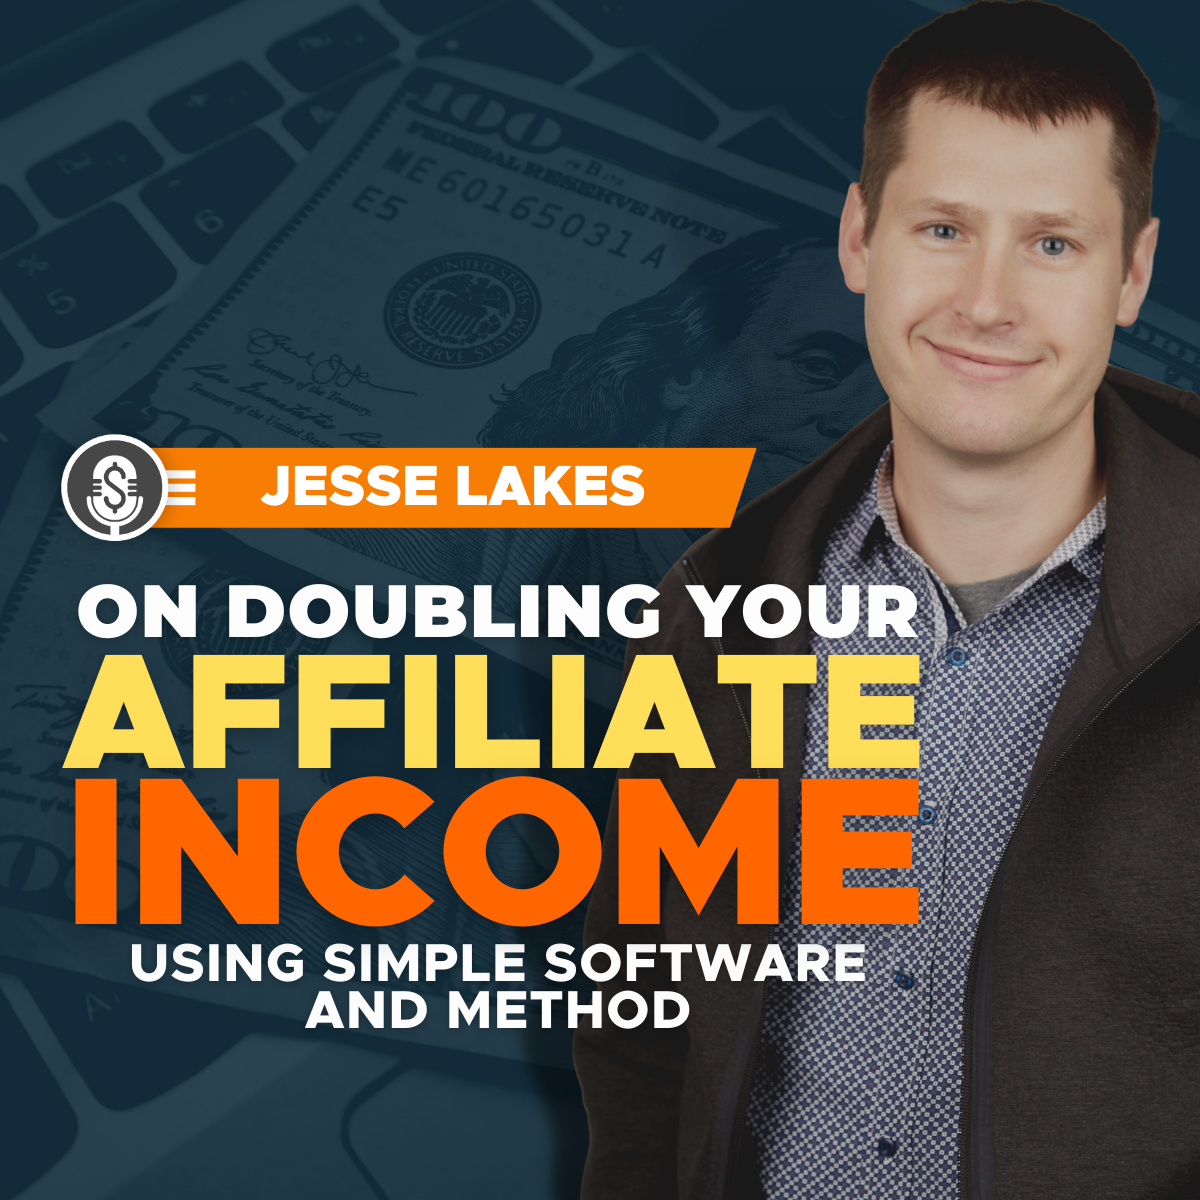 Jesse Lakes on Doubling Your Affiliate Income Using This Simple Software